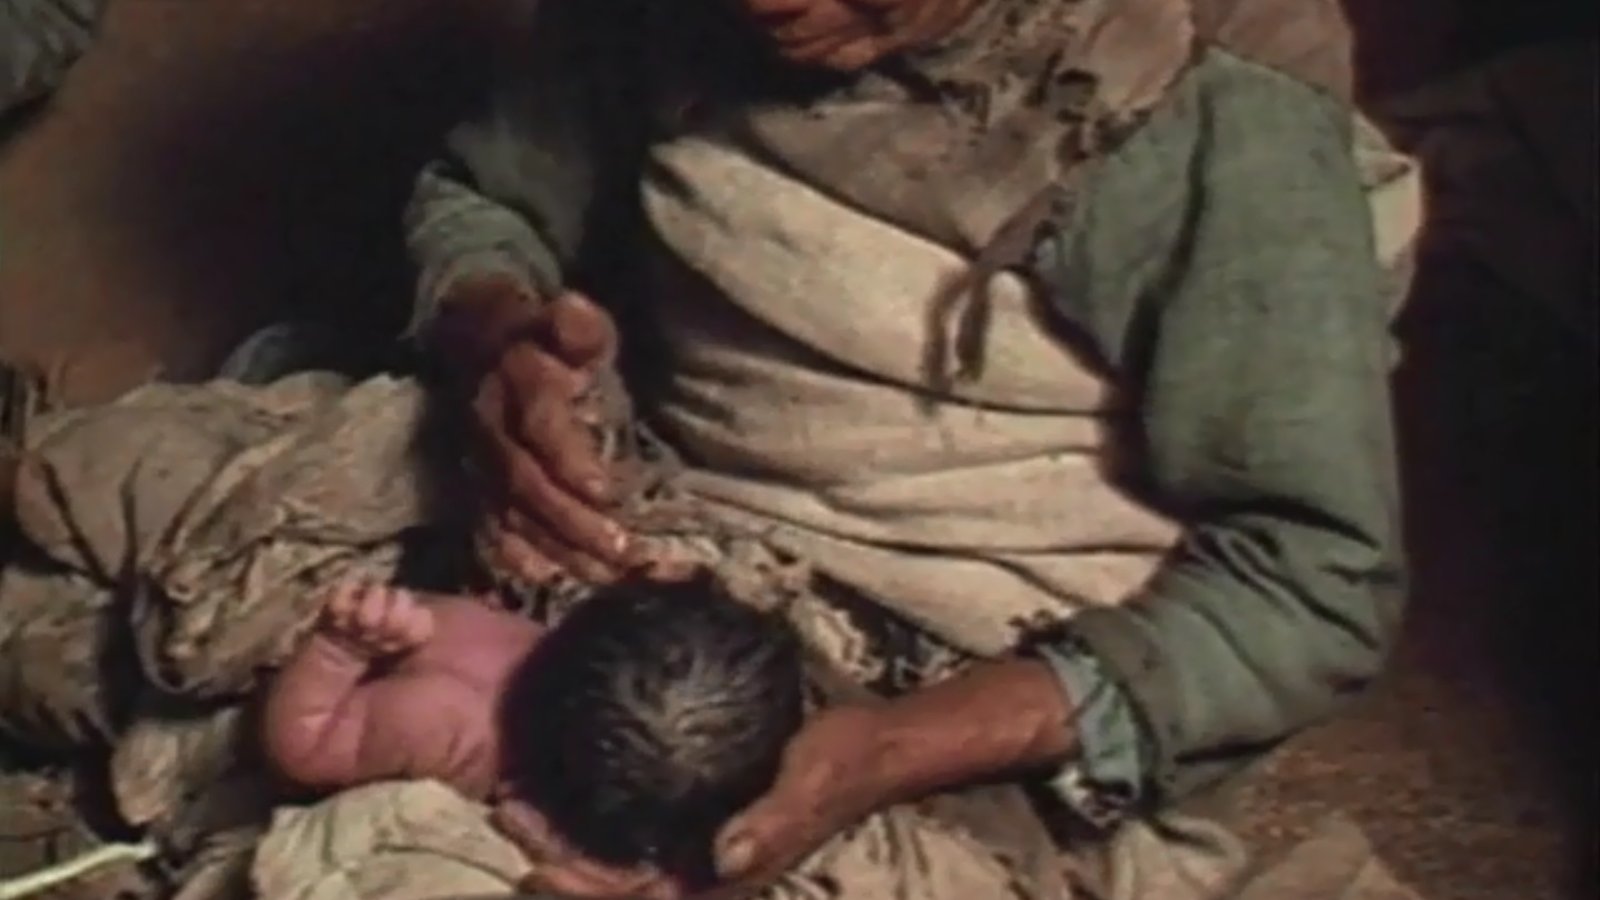 We Know How To Do These Things: Birth In a Newar Village